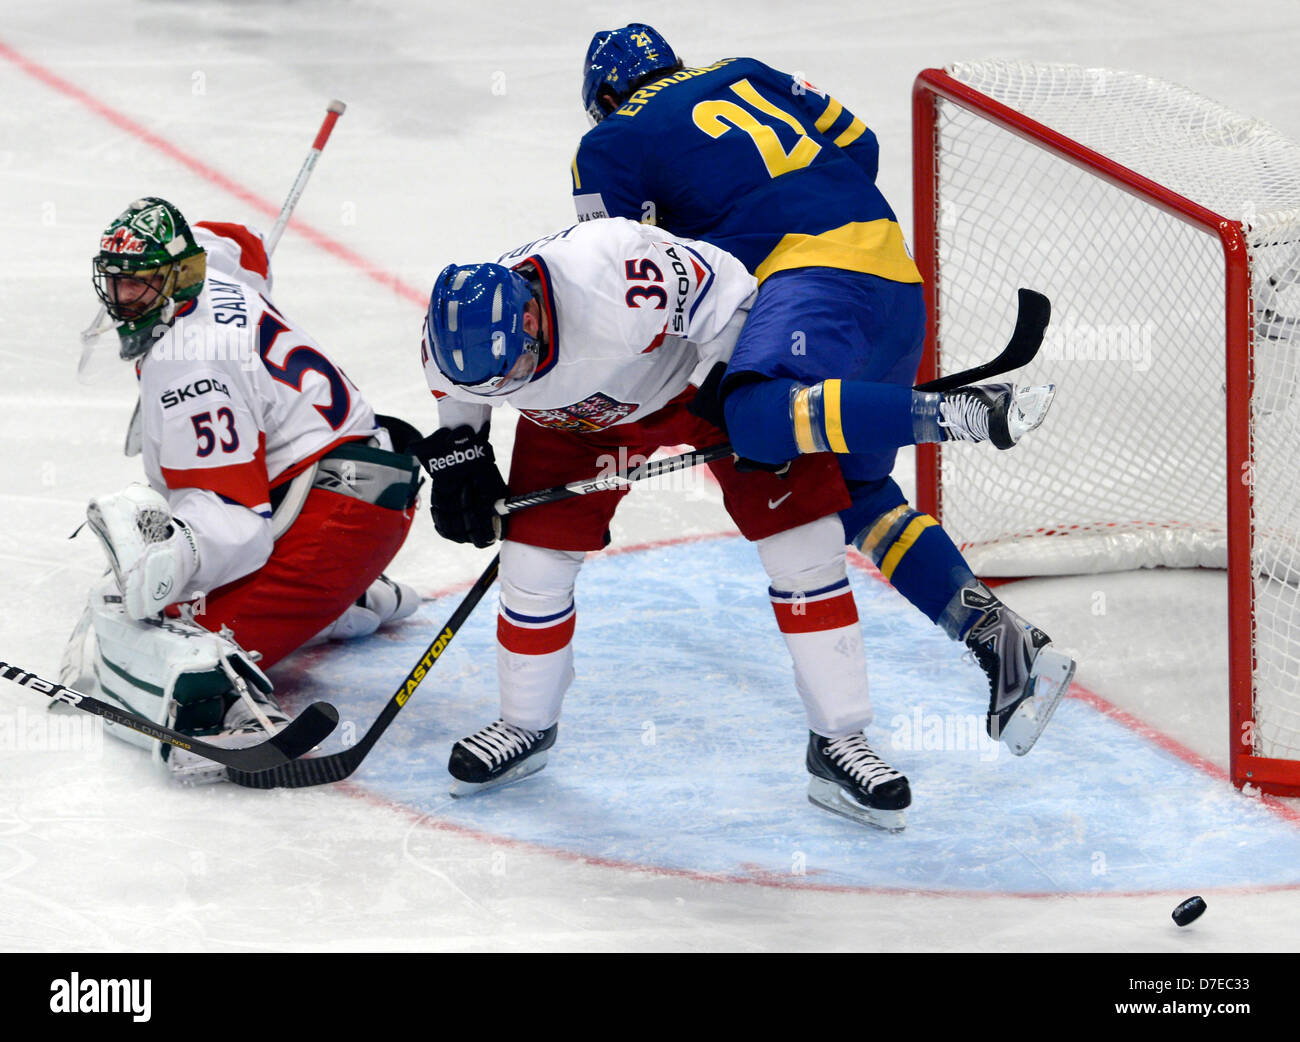 IIHF World Championships, Ice Hockey, Group A, Czech Republic vs Sweden,  May 4, 2013, Stockholm, Sweden. From left: Alexander Salak and Jan Hejda of  Czech Republic and Loui Eriksson of Sweden. (CTK